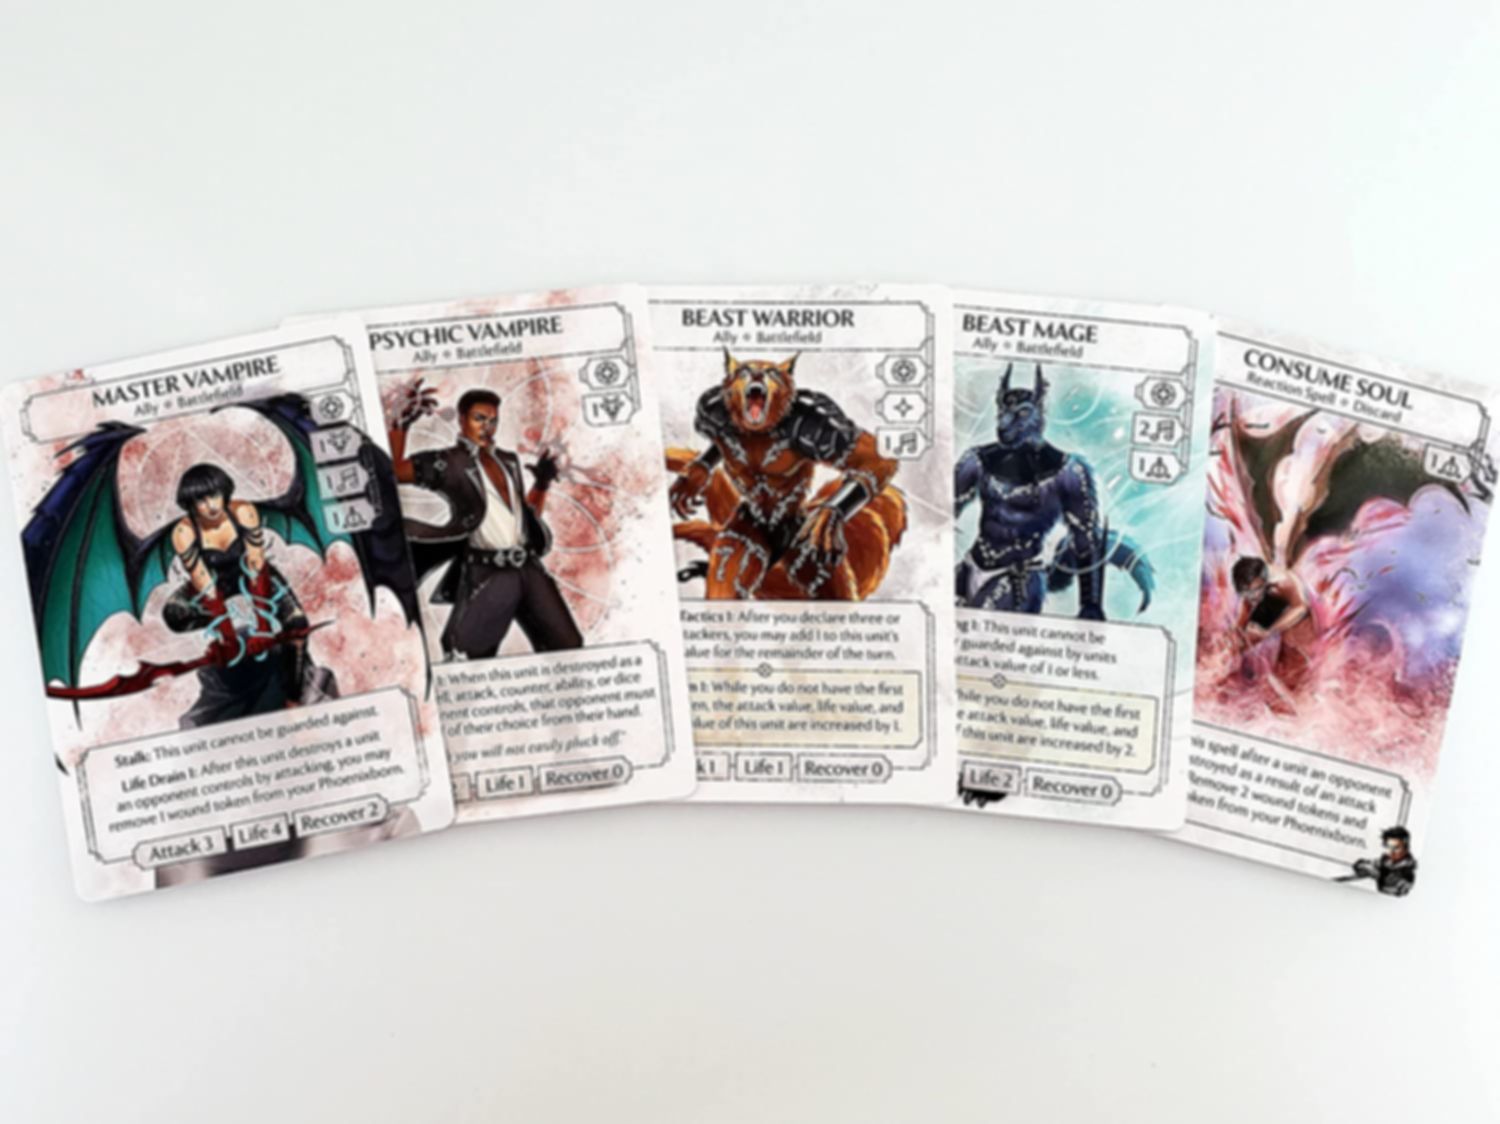 Ashes Reborn: The Demons of Darmas cards